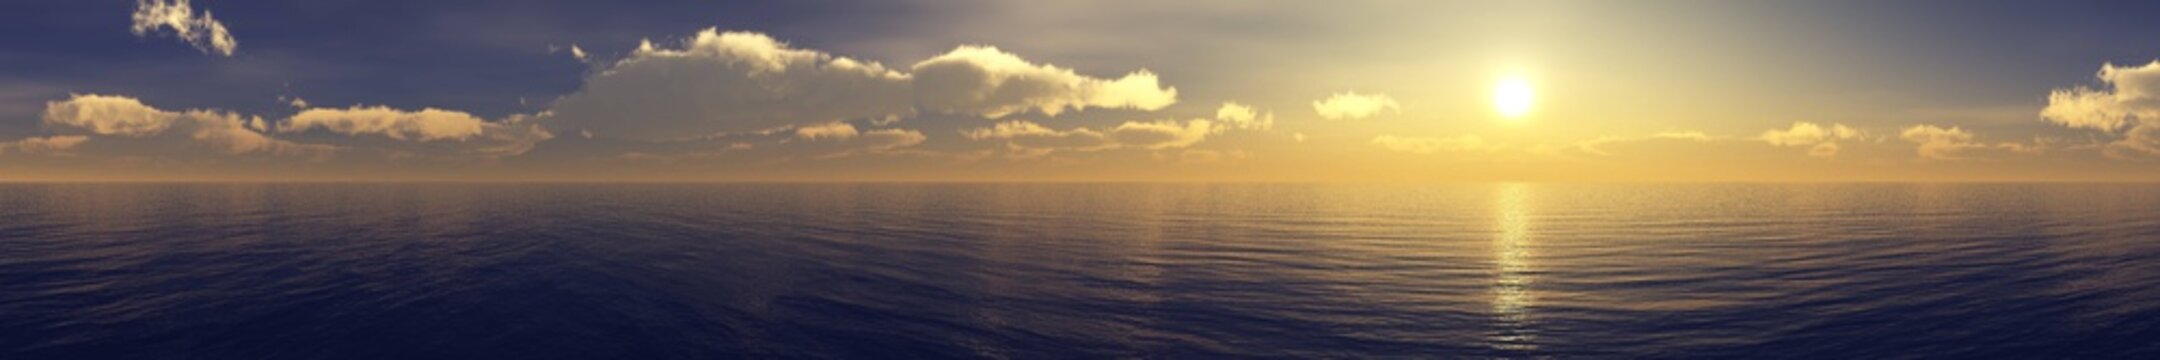 ocean sunset, panorama, sunrise over the water, clouds over the sea,
3D rendering
